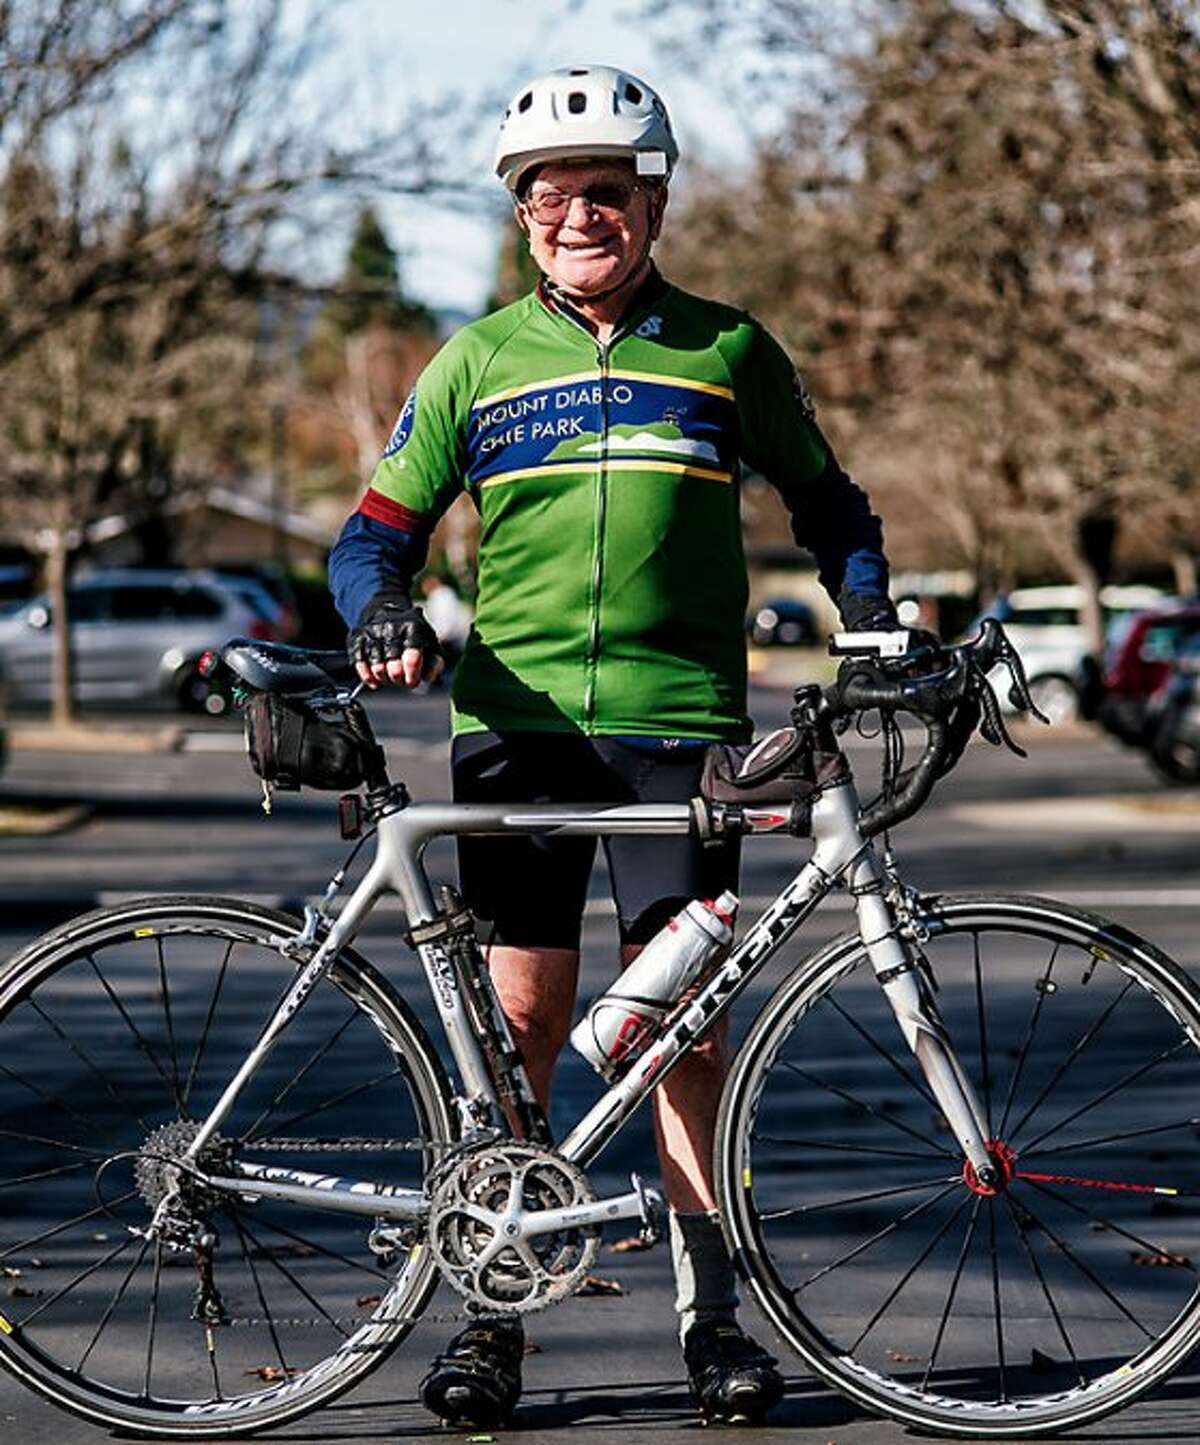 Joe Shami, 85, completed his 600th week in a row of cycling to the Mount Diablo summit